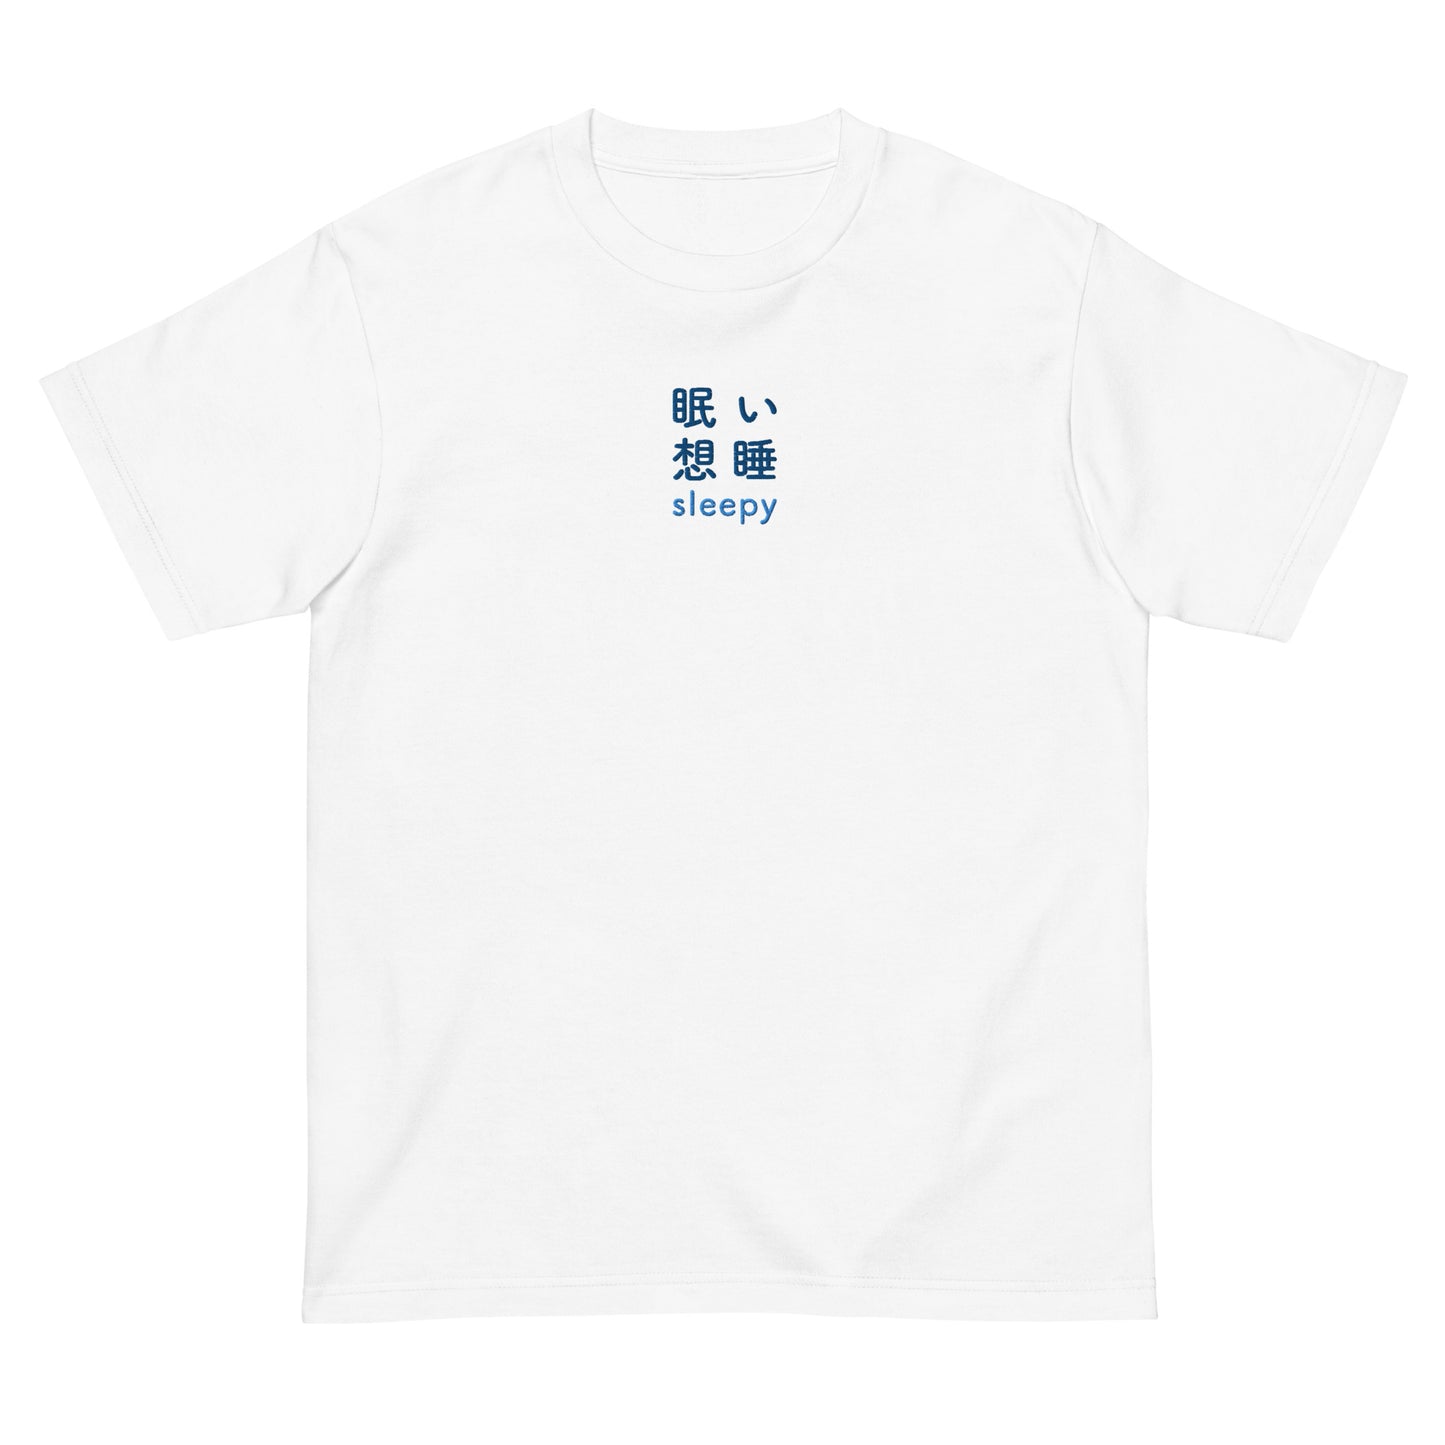 White High Quality Tee - Front Design with an Blue Embroidery "Sleepy" in Japanese,Chinese and English